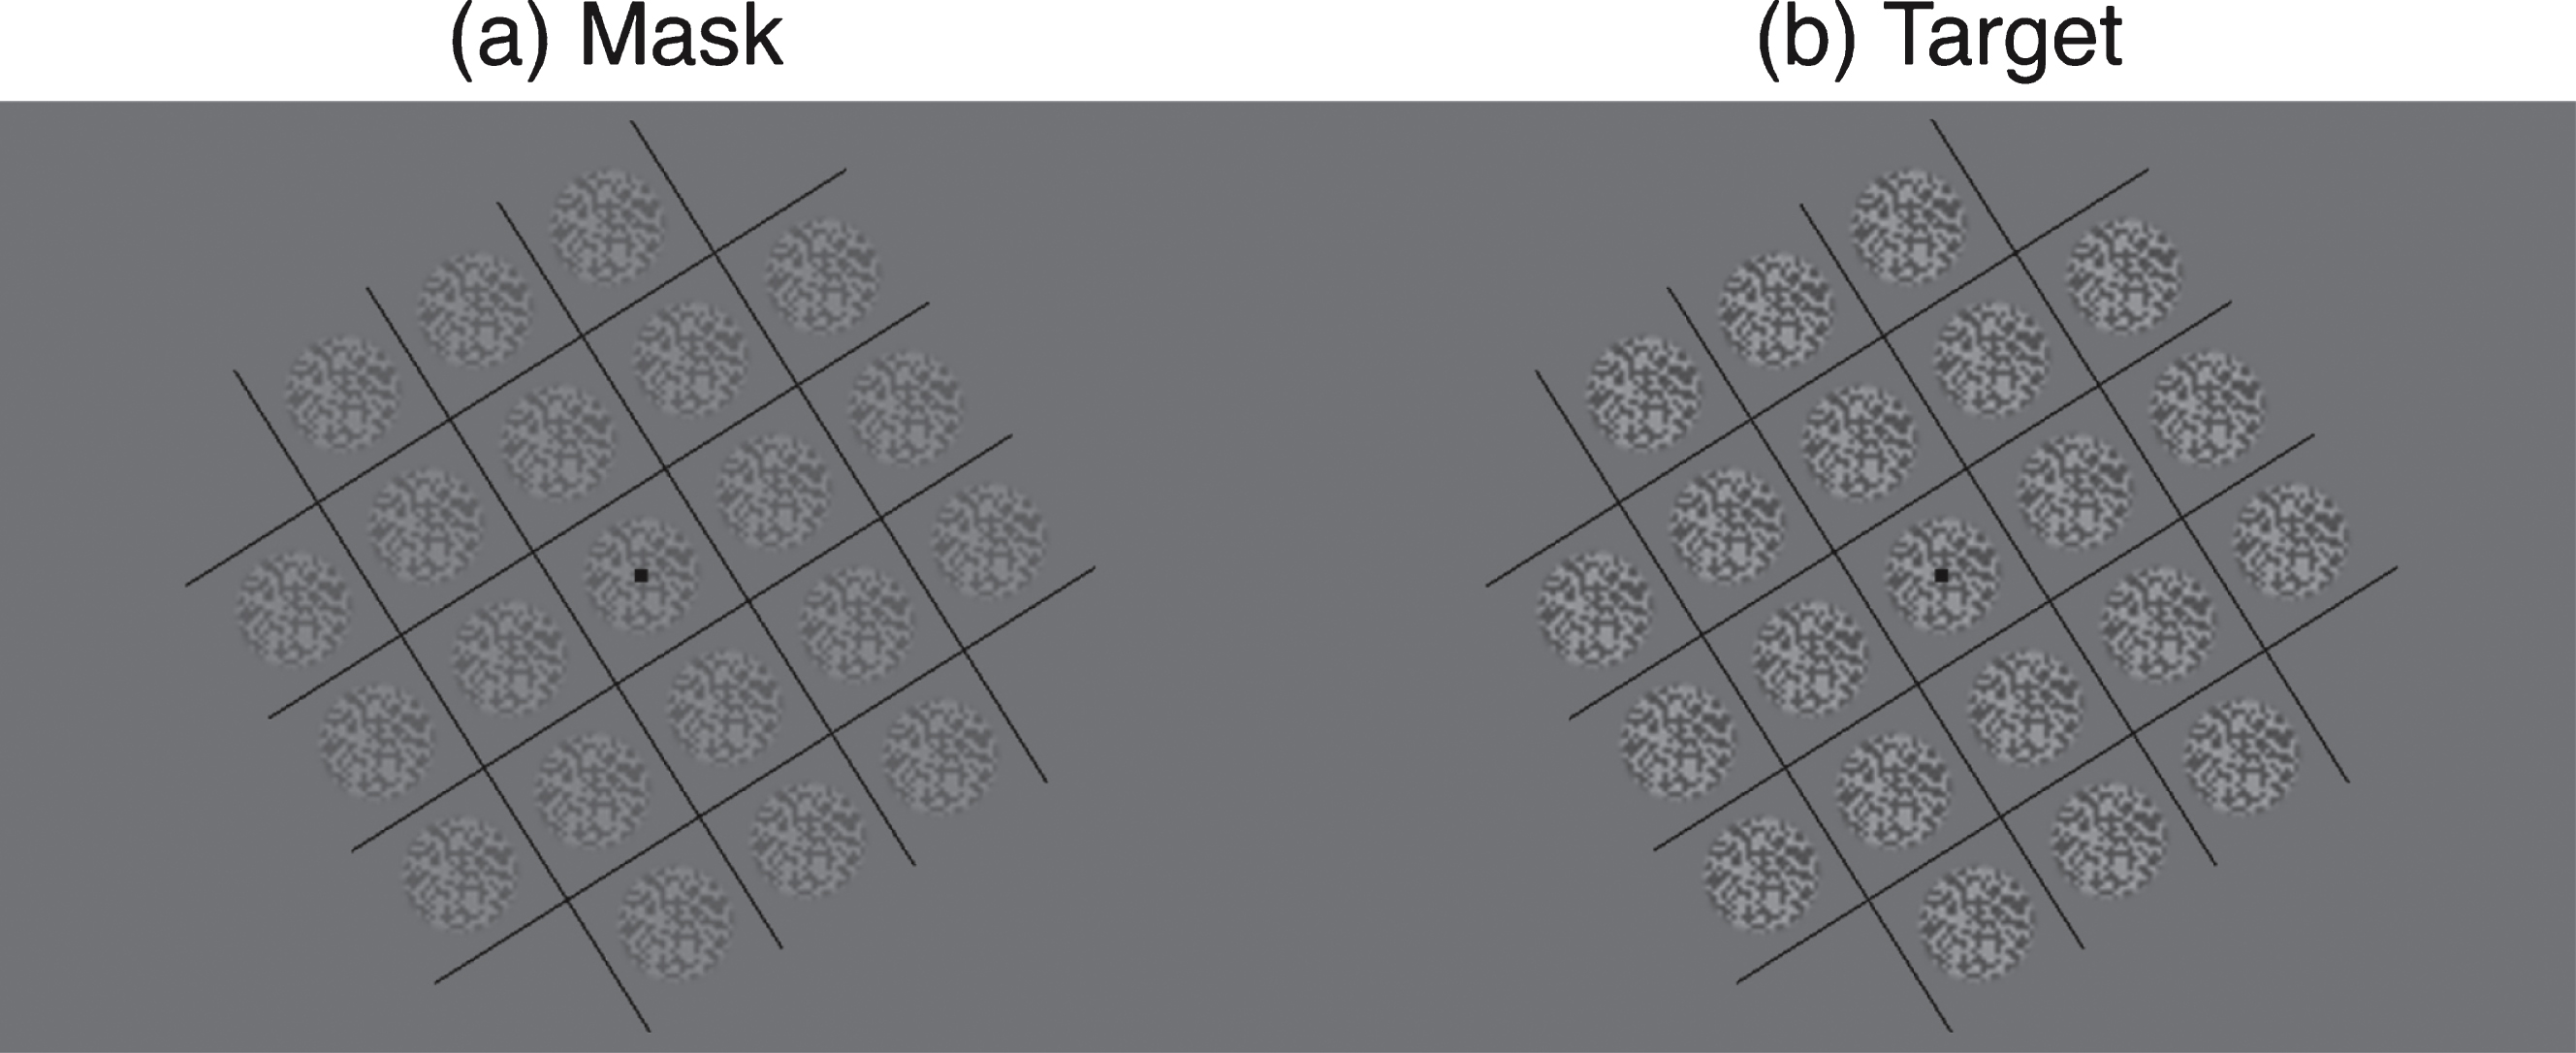 Example stimuli used in experiments. Mask (a) and target (b) were patches of static white noise windowed by a raised cosine envelope. The patches were tiled in a 5×5 grid, surrounded by a series of orthogonal lines to aid binocular fusion. The orientation of the grids was varied randomly from trial to trial to minimise local adaptation.